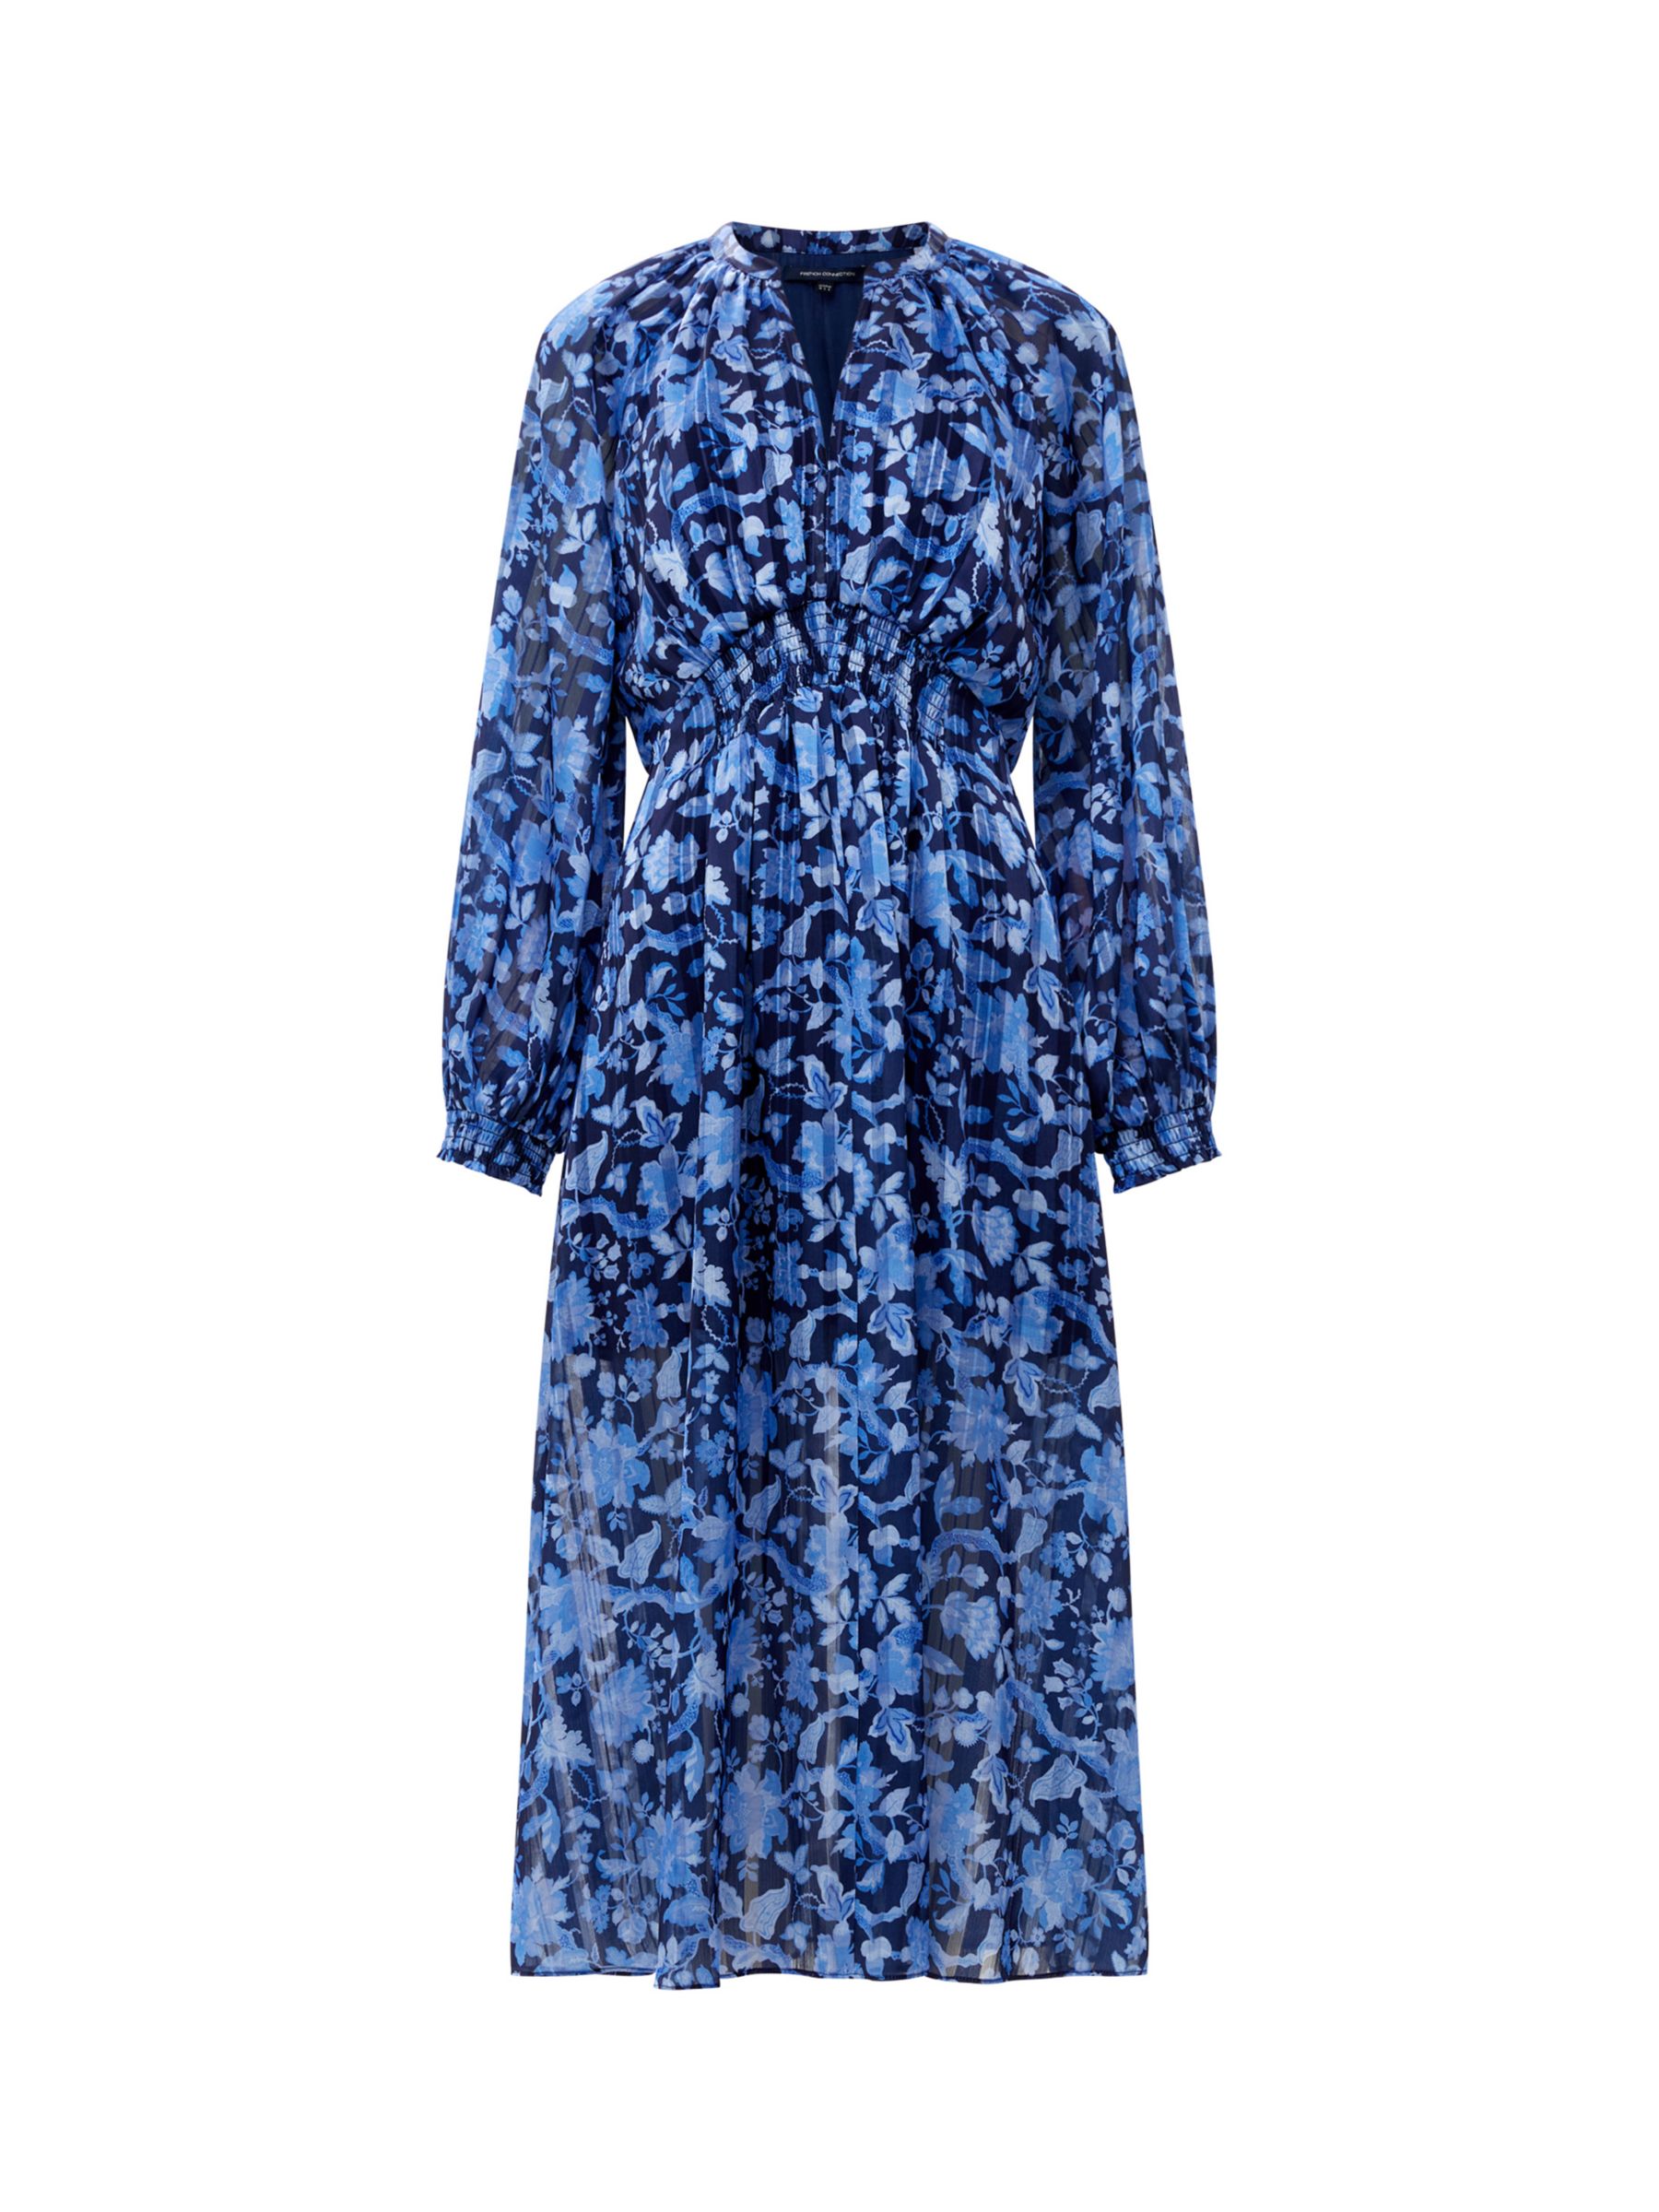 Buy French Connection Cynthia Fauna Dress, Midnight Blue Online at johnlewis.com